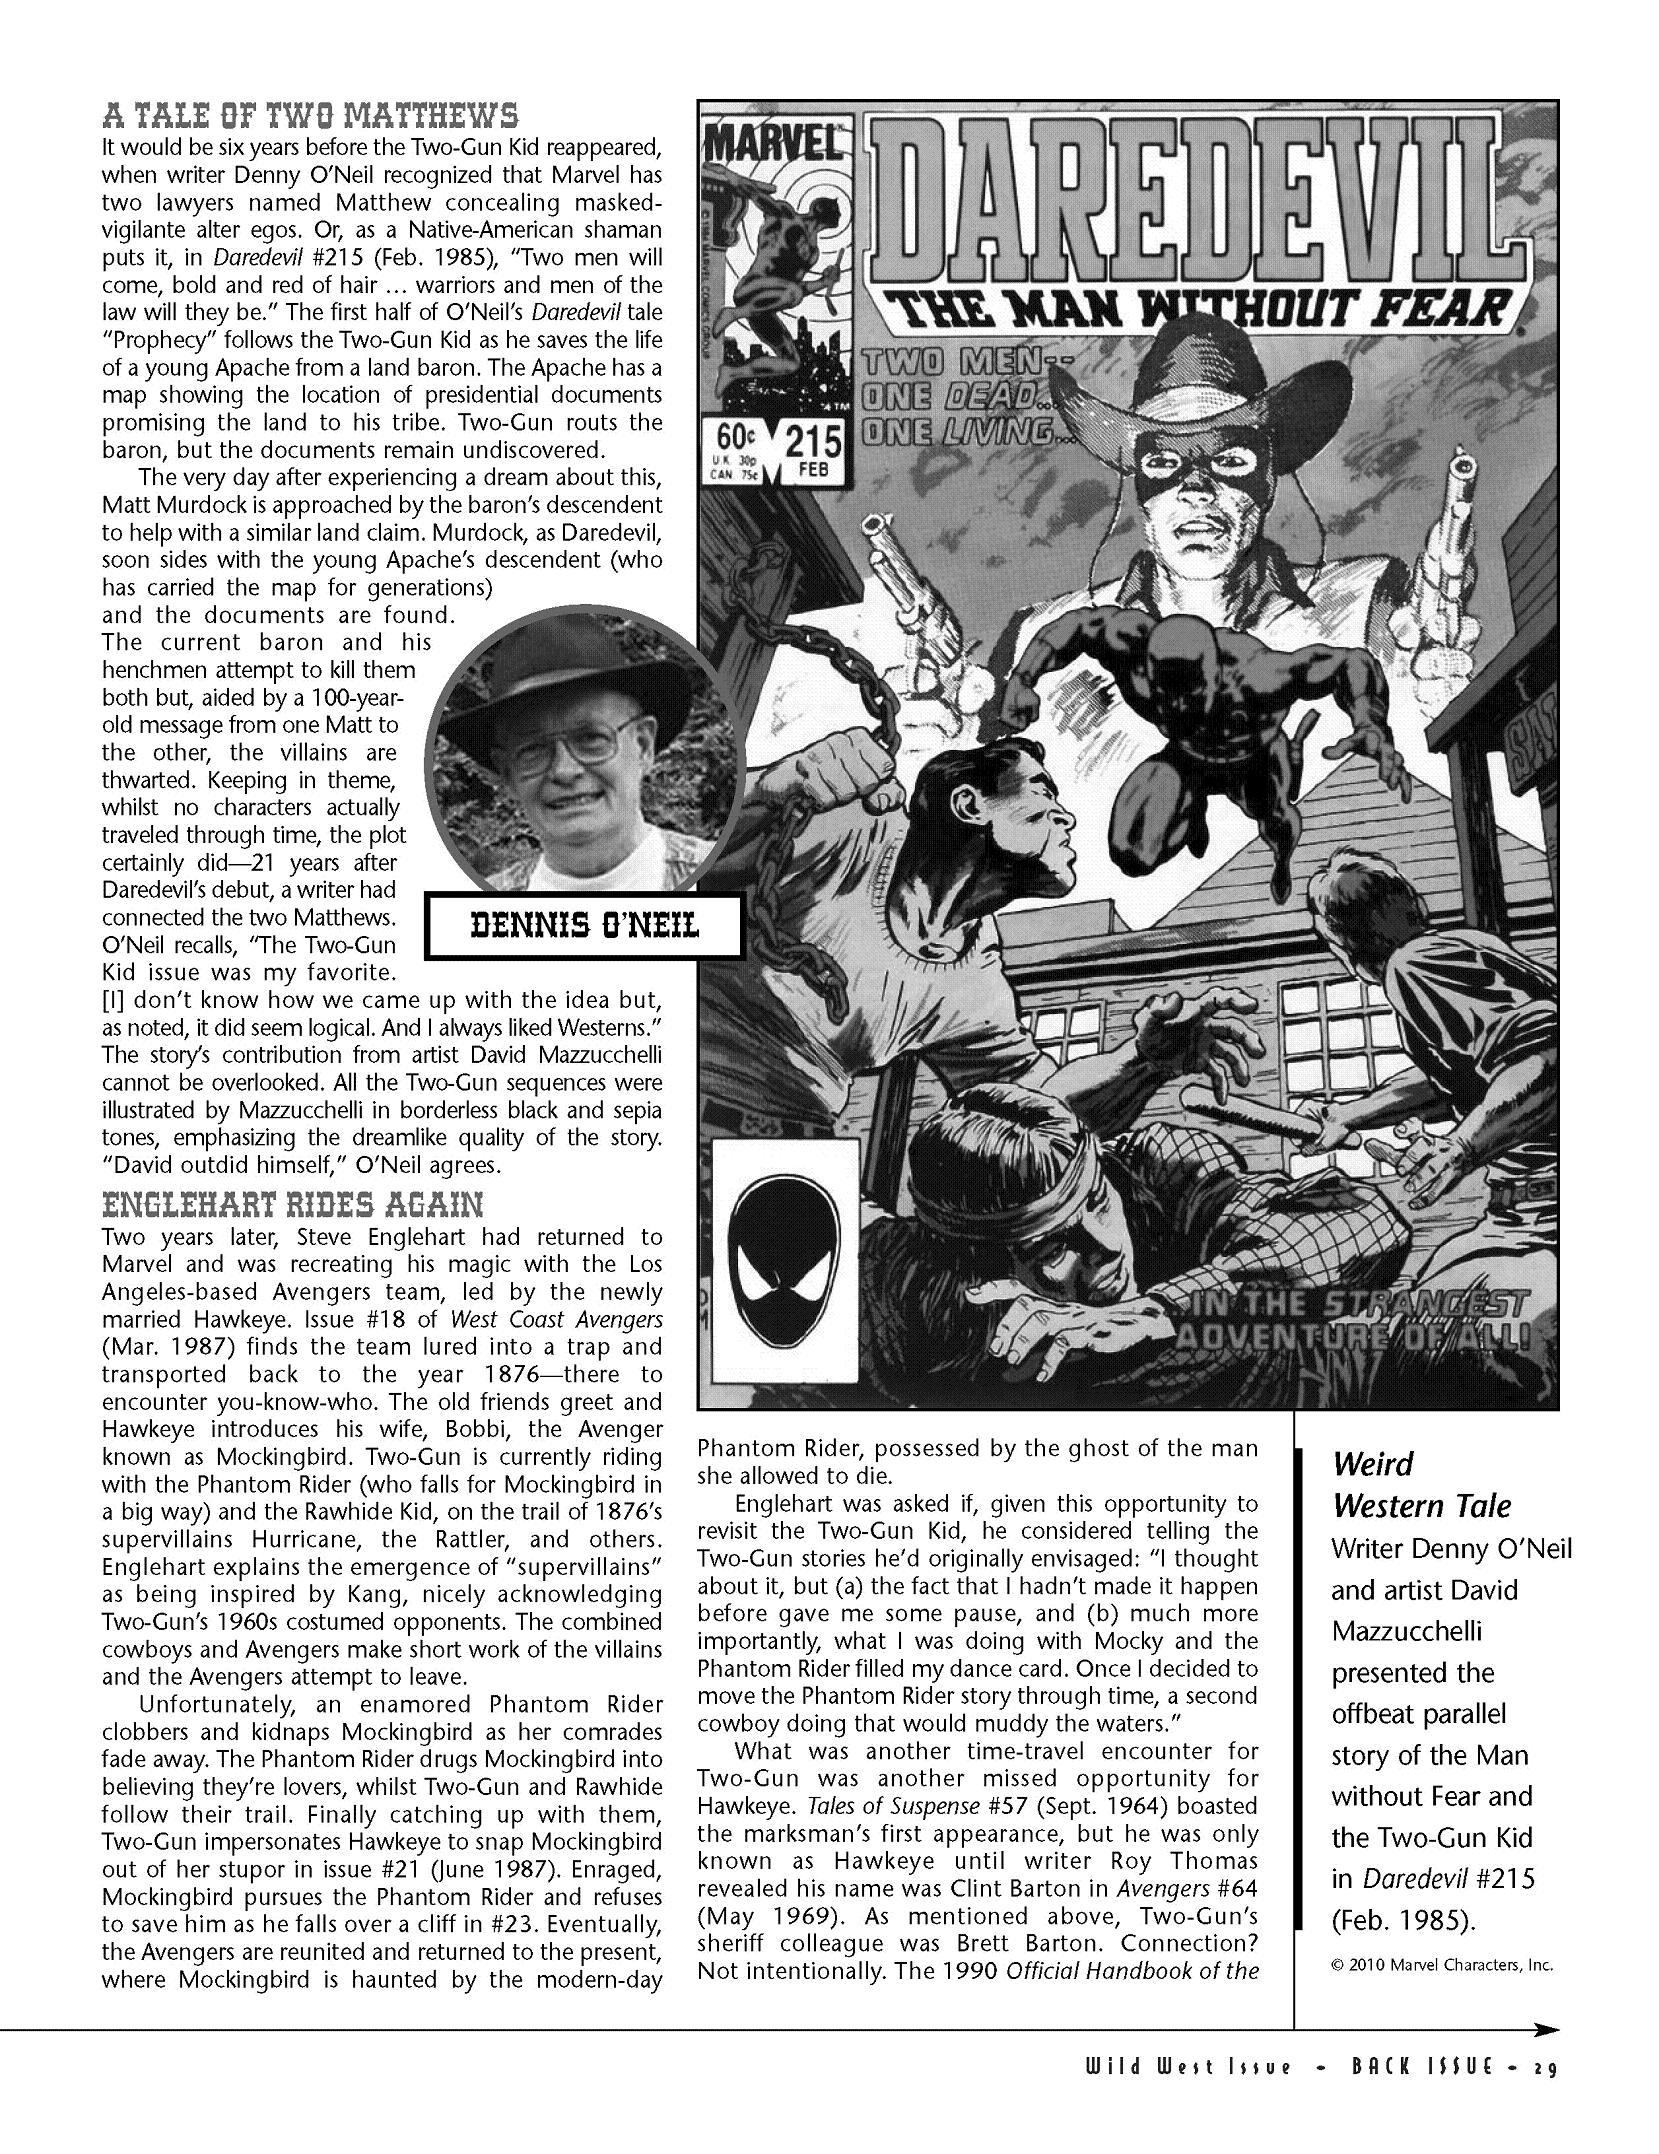 Read online Back Issue comic -  Issue #42 - 31